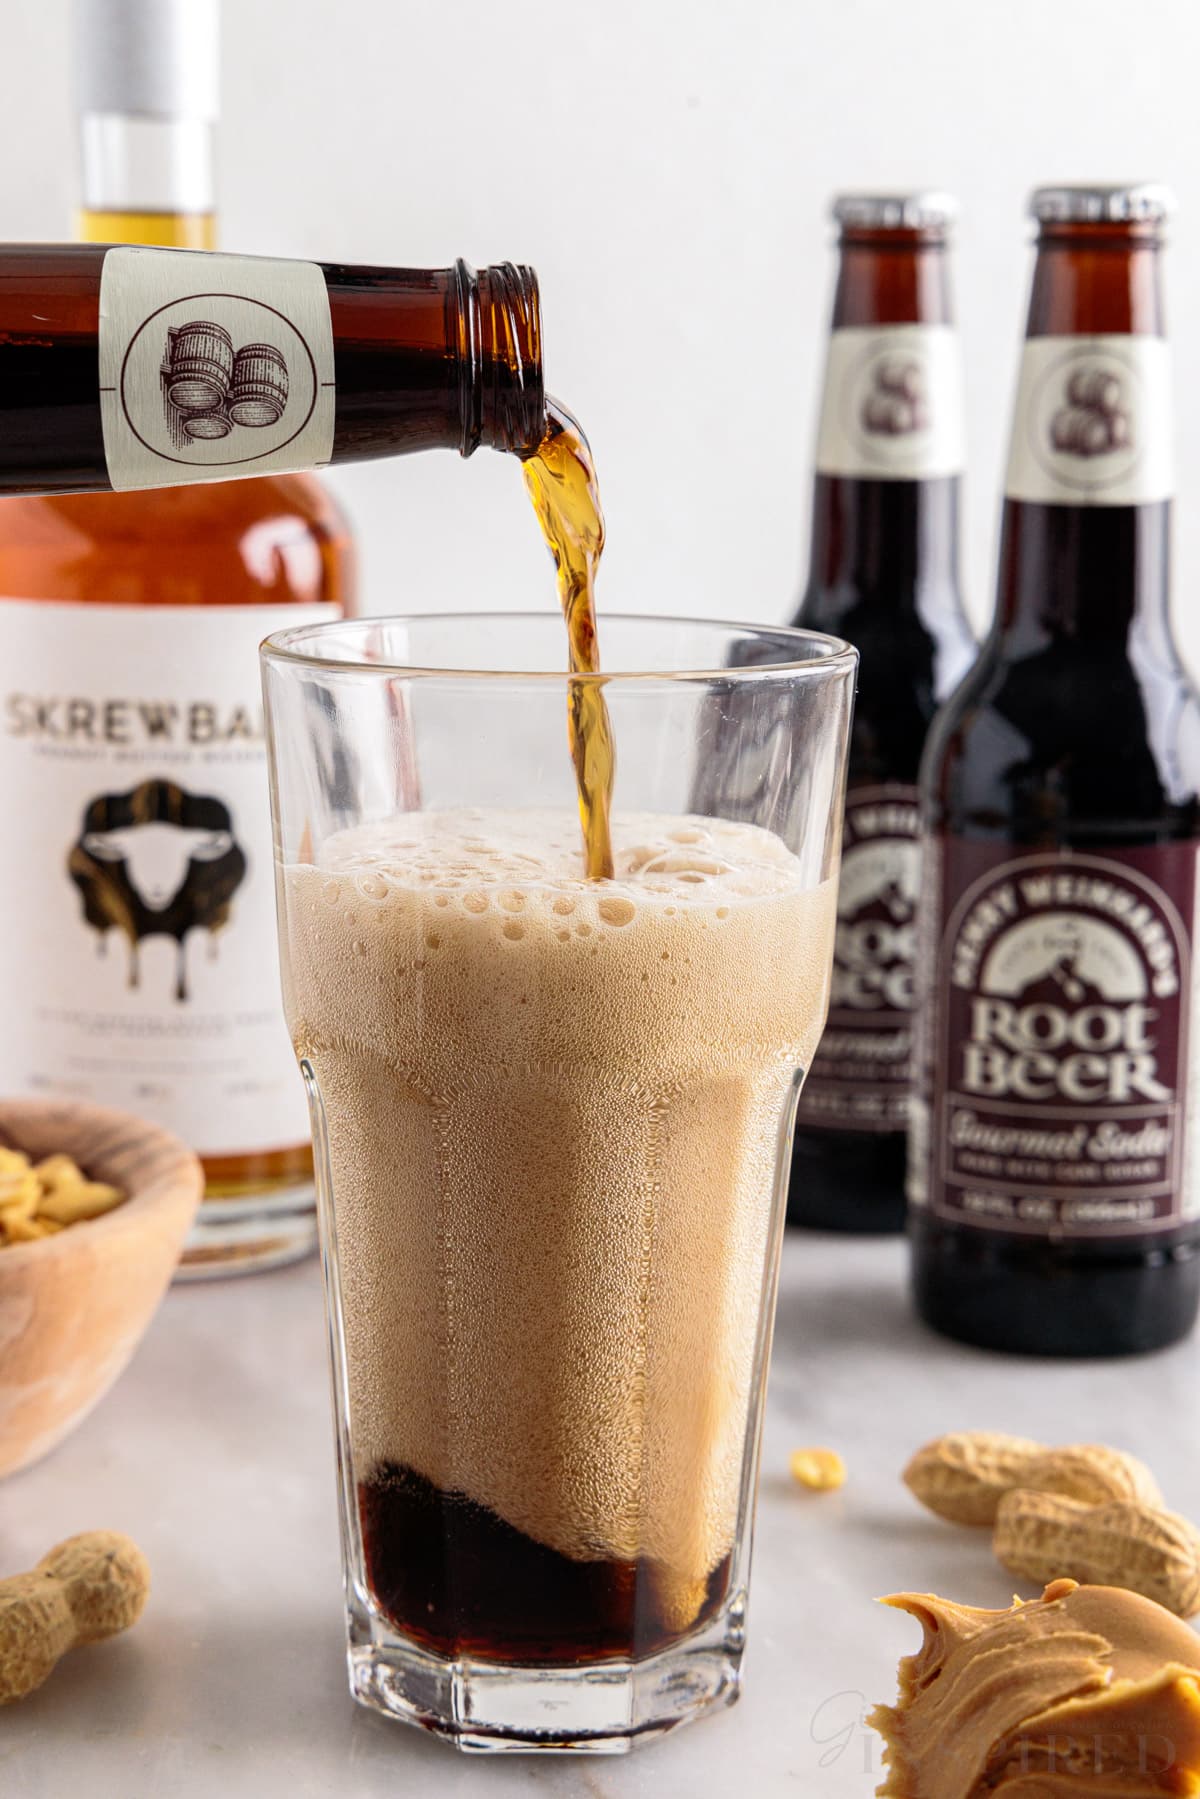 Root beer poured into a tall glass.